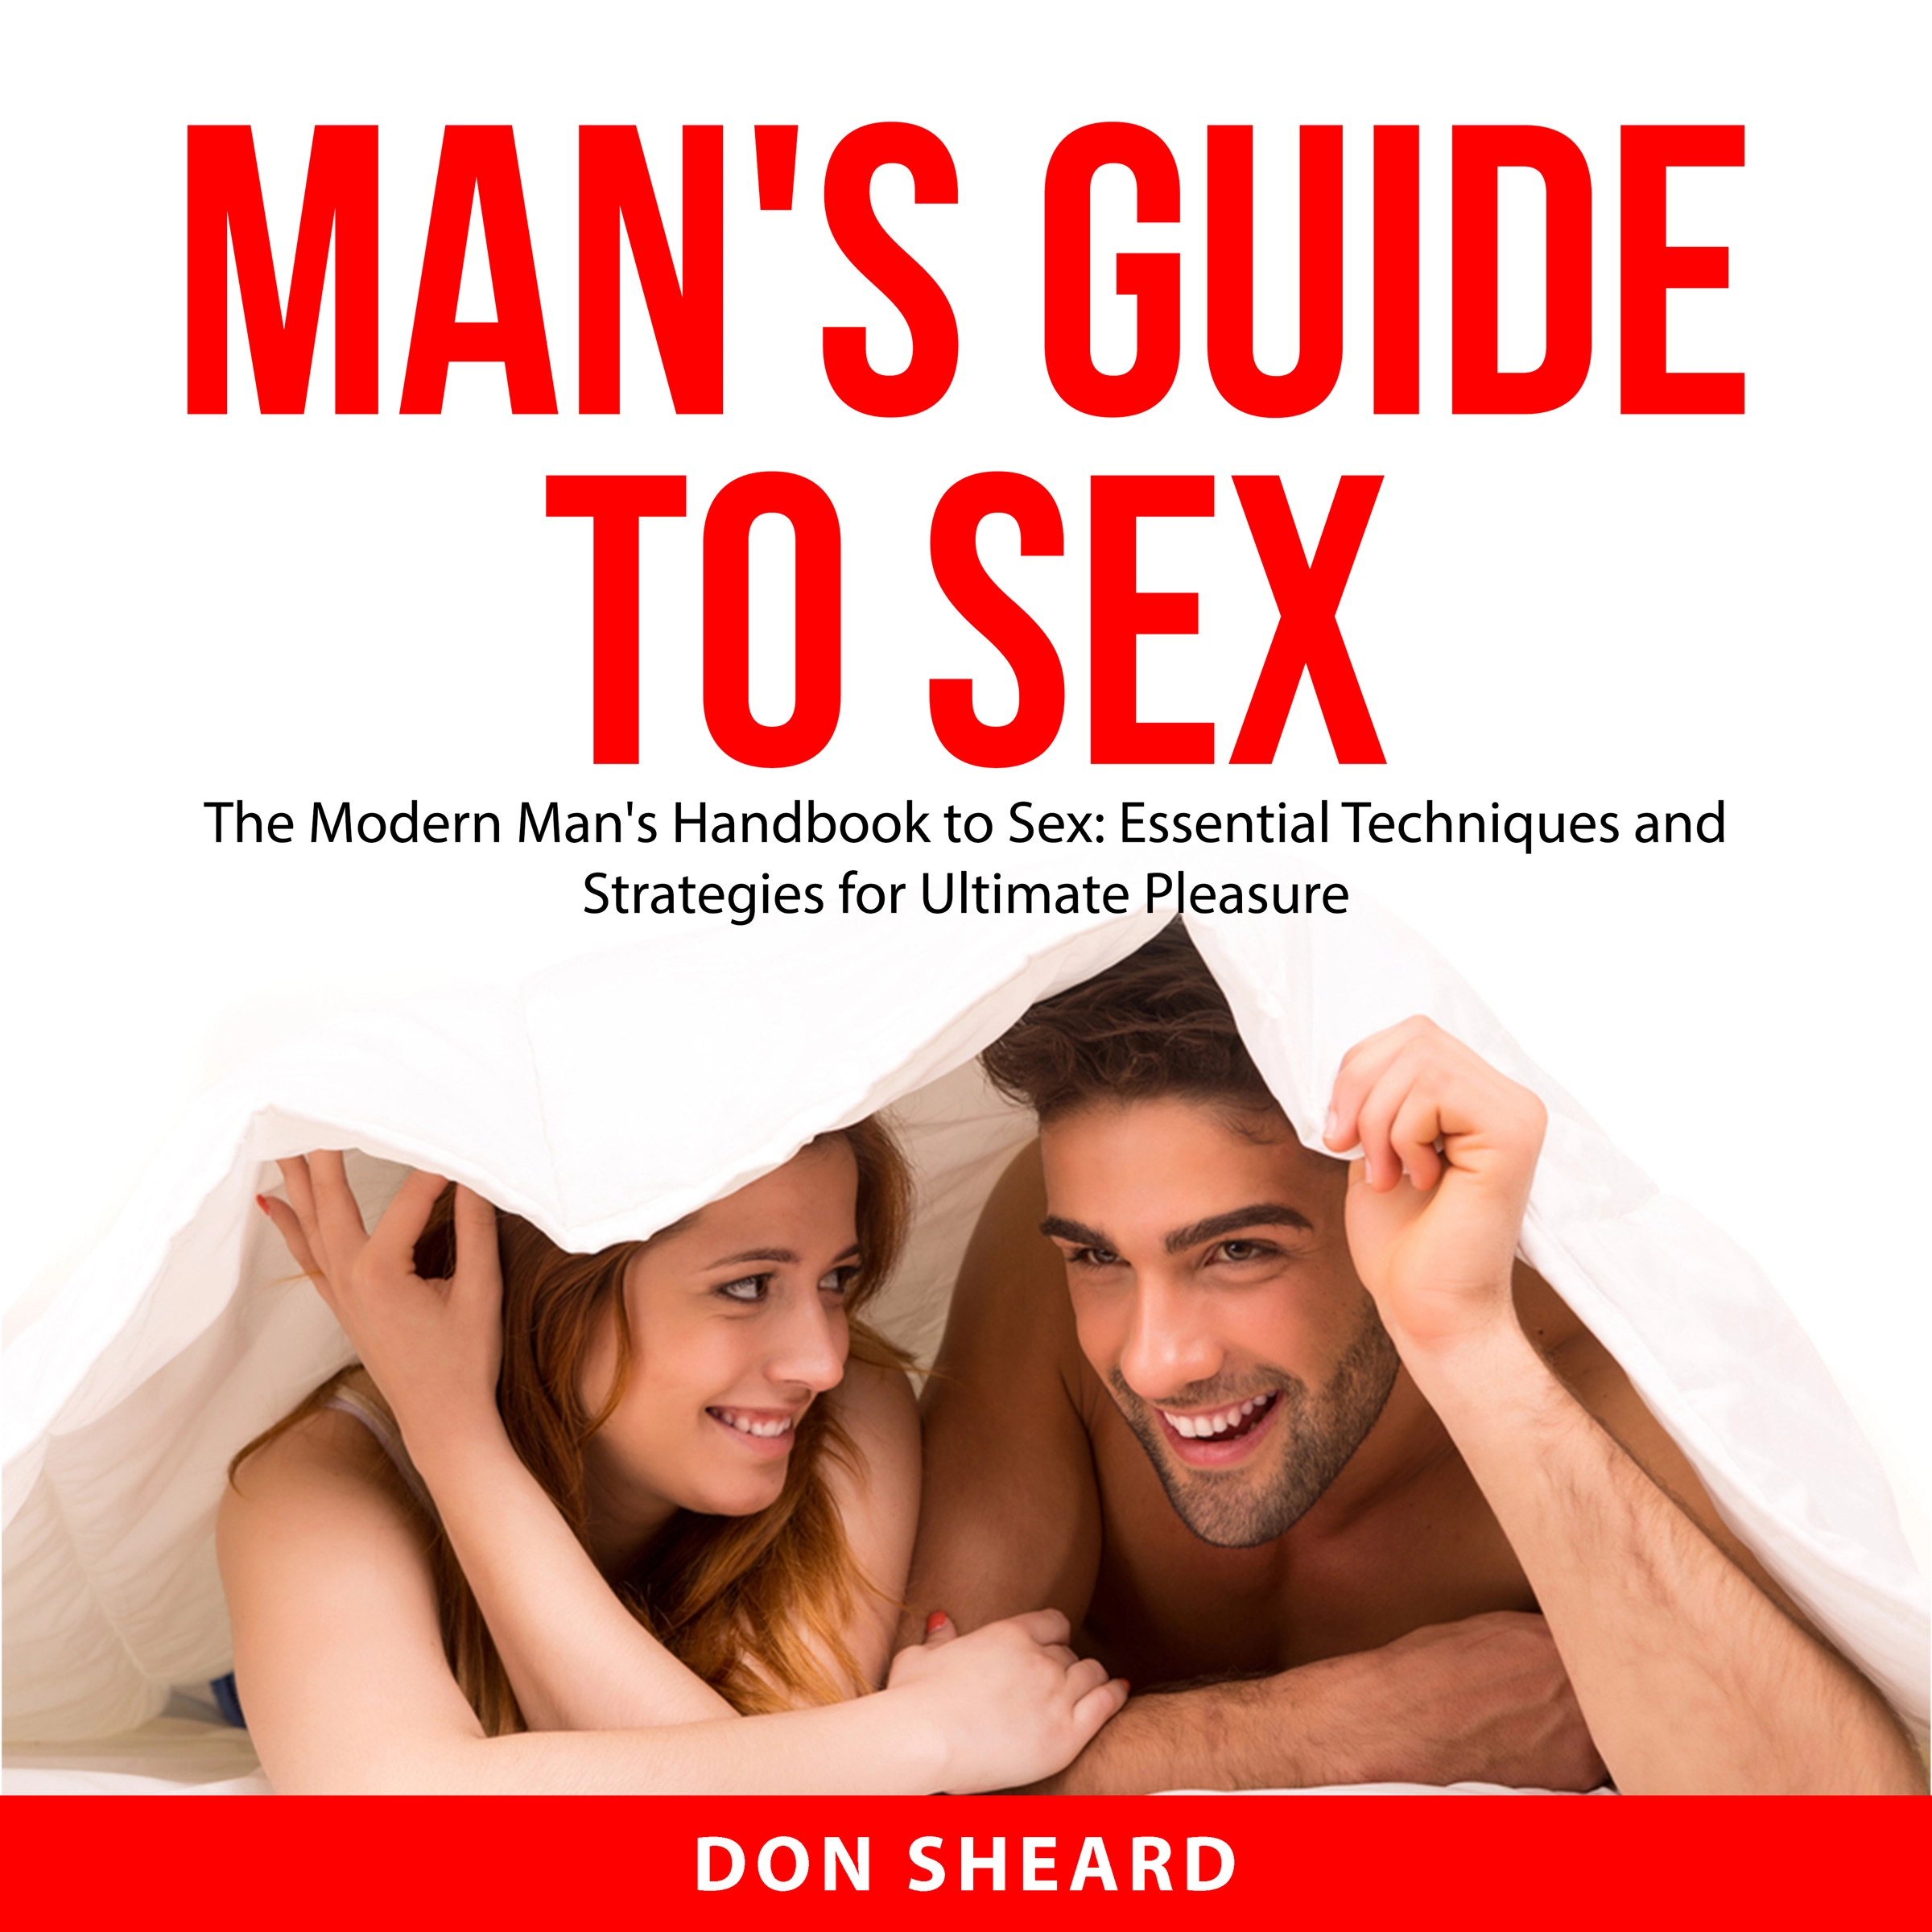 Man's Guide to Sex Audiobook by Don Sheard